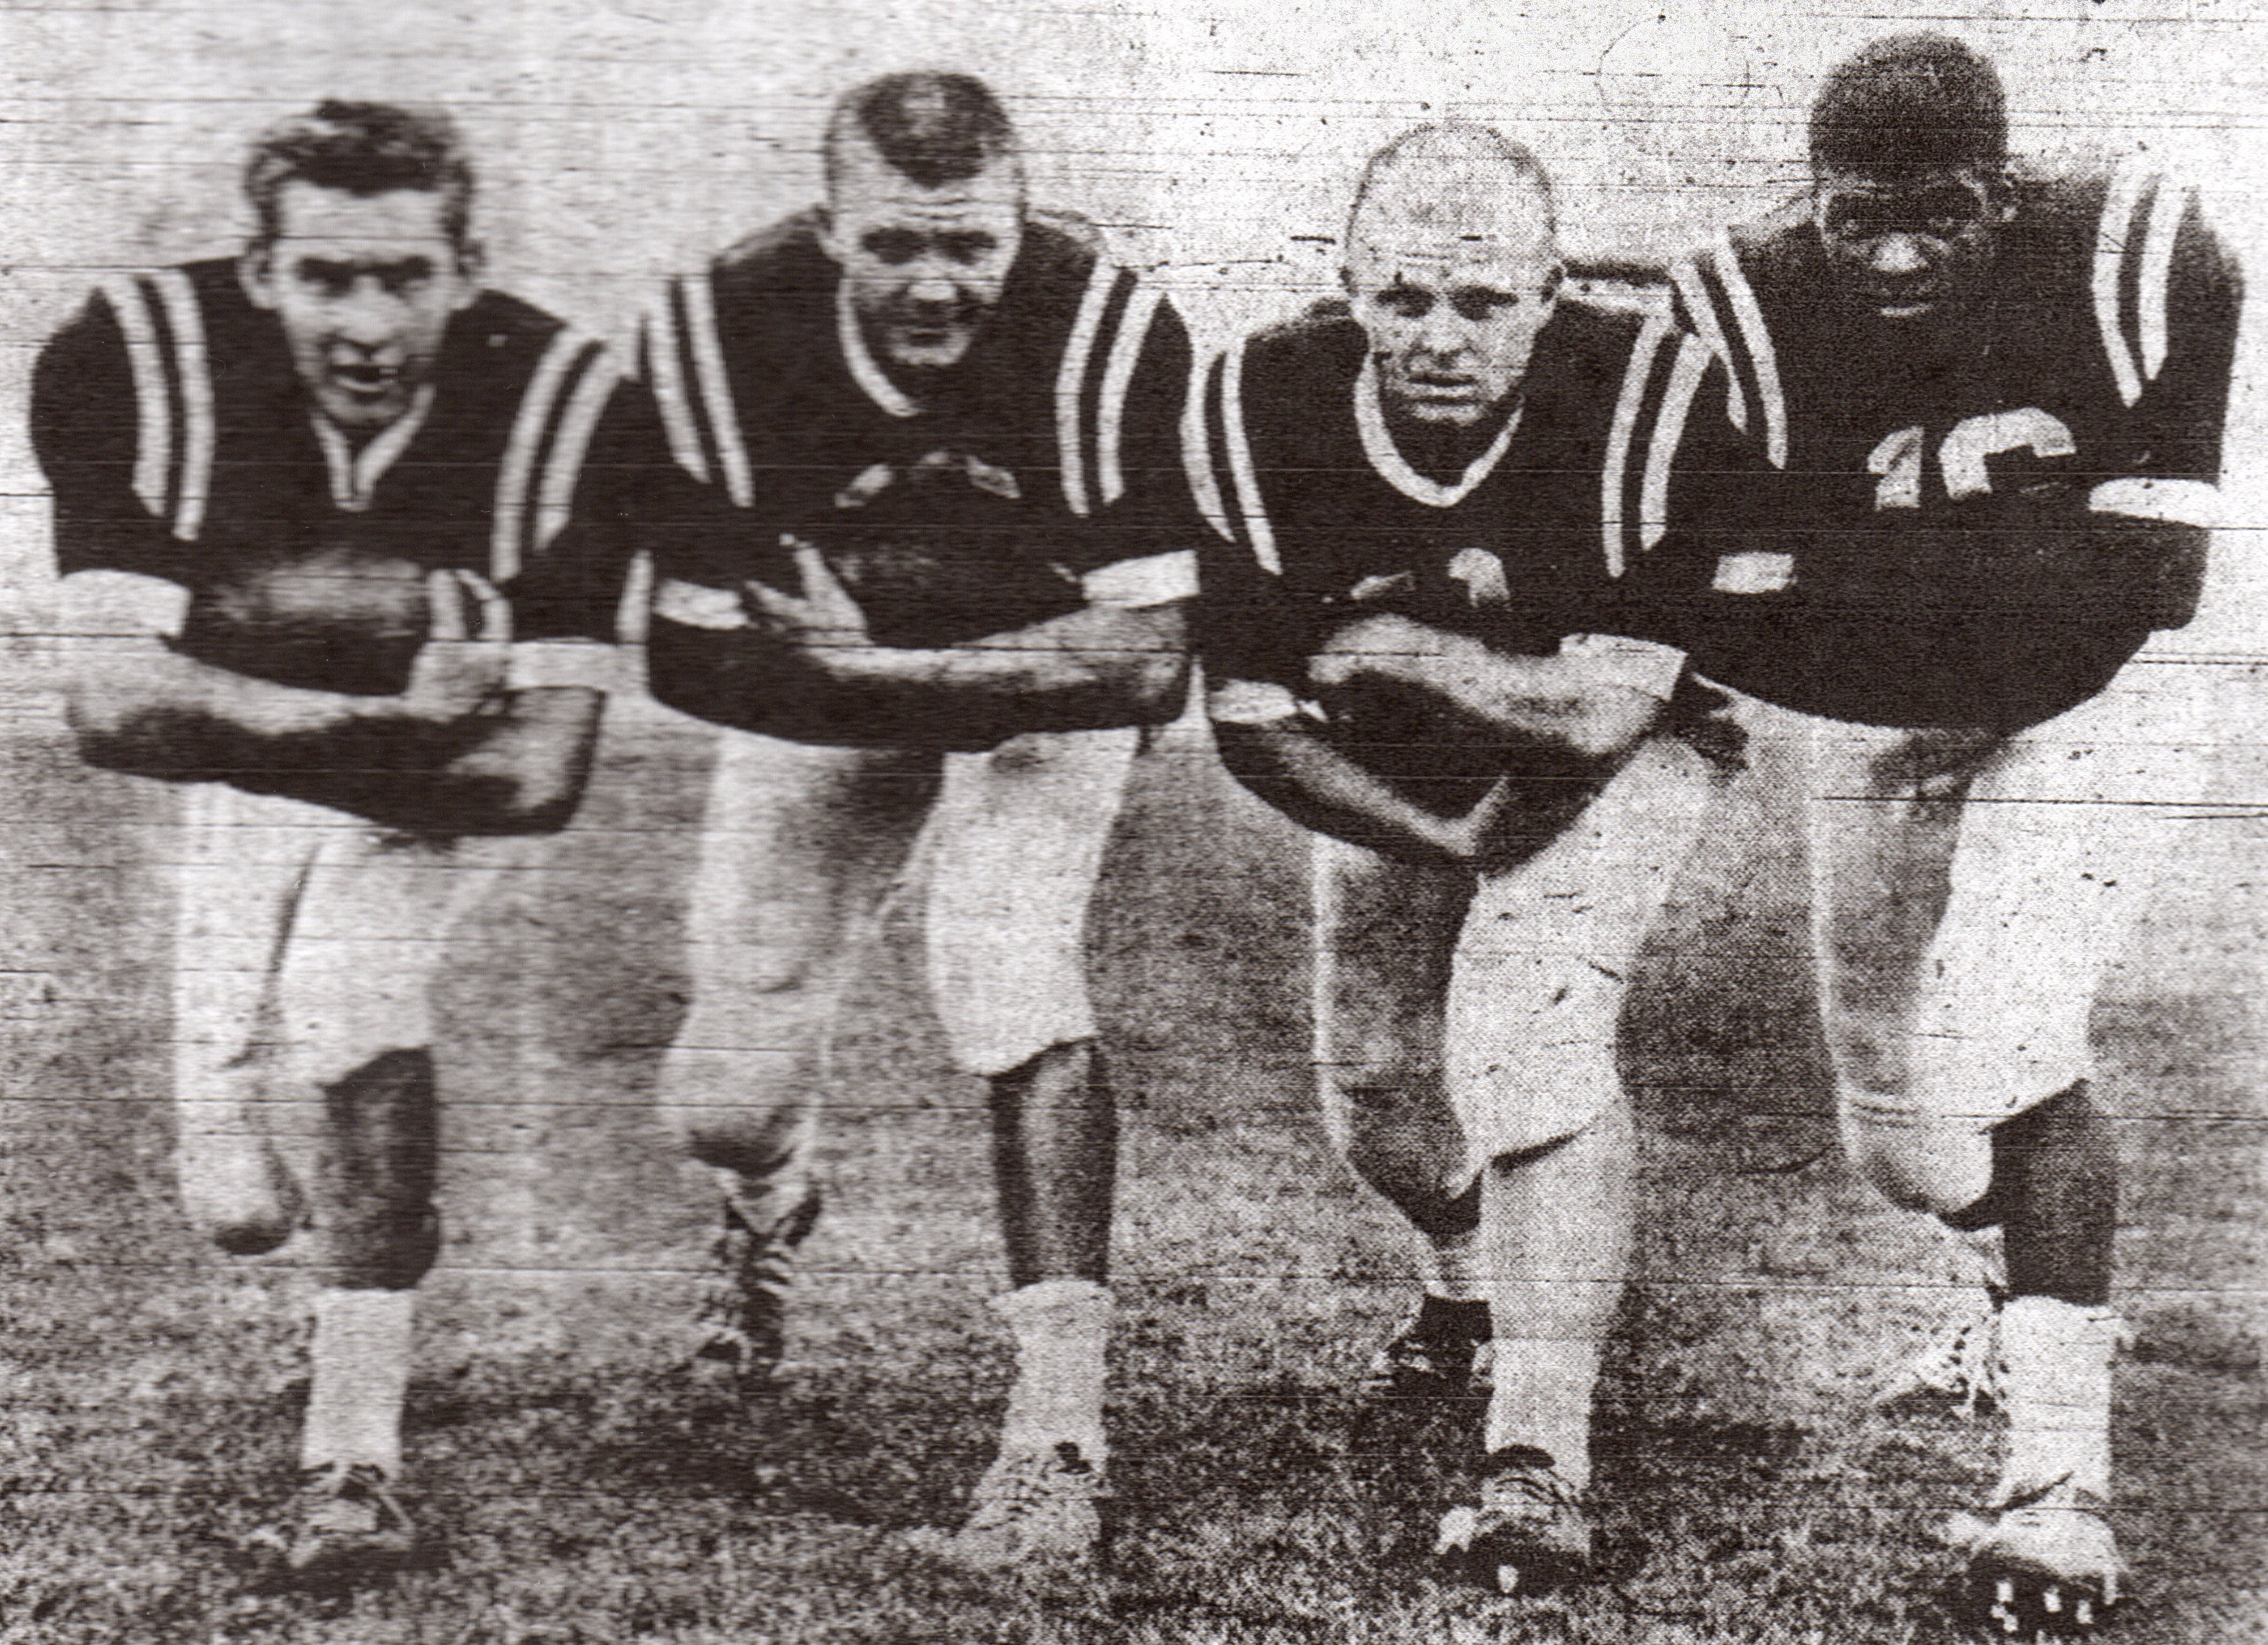 Warren (second from left) was among essential players with Leslie Pearson, Jerry Hotham, and Art Graham (from left).